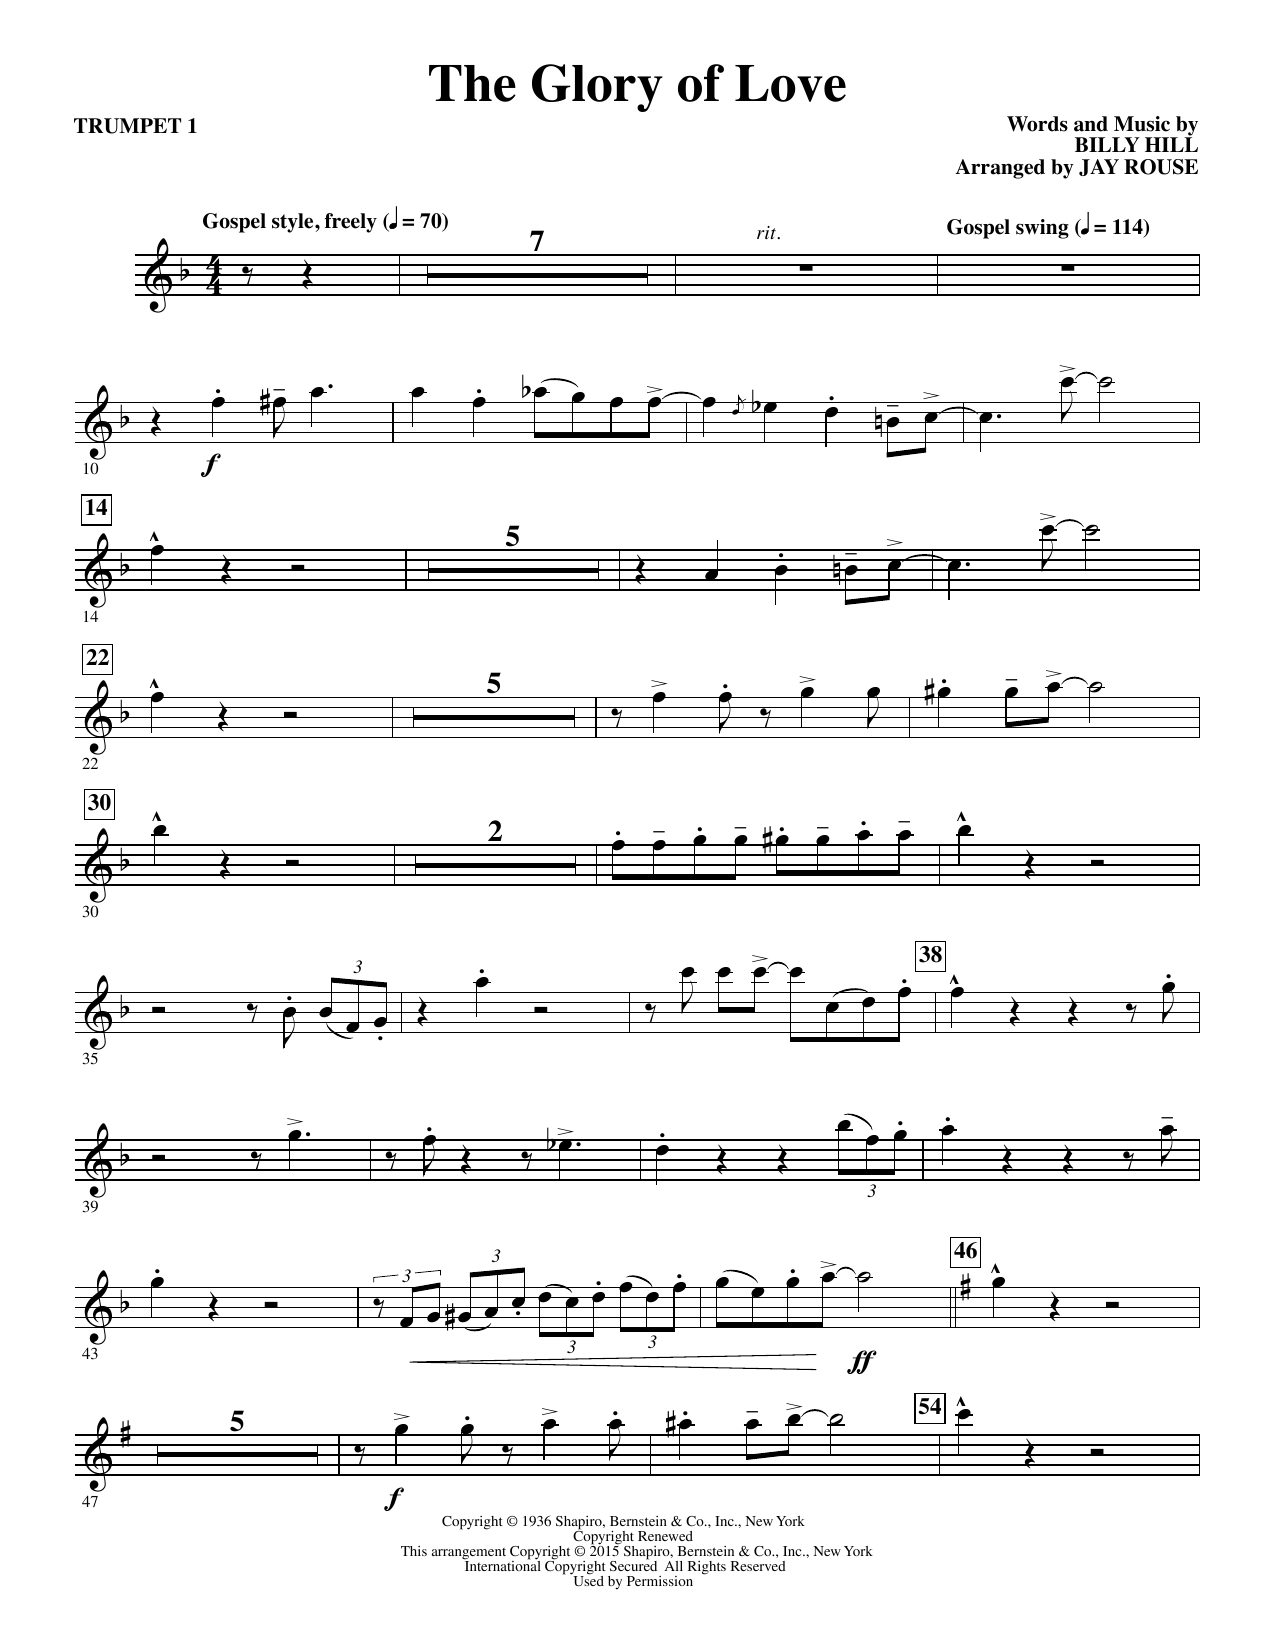 Jay Rouse The Glory of Love - Bb Trumpet 1 sheet music notes and chords. Download Printable PDF.